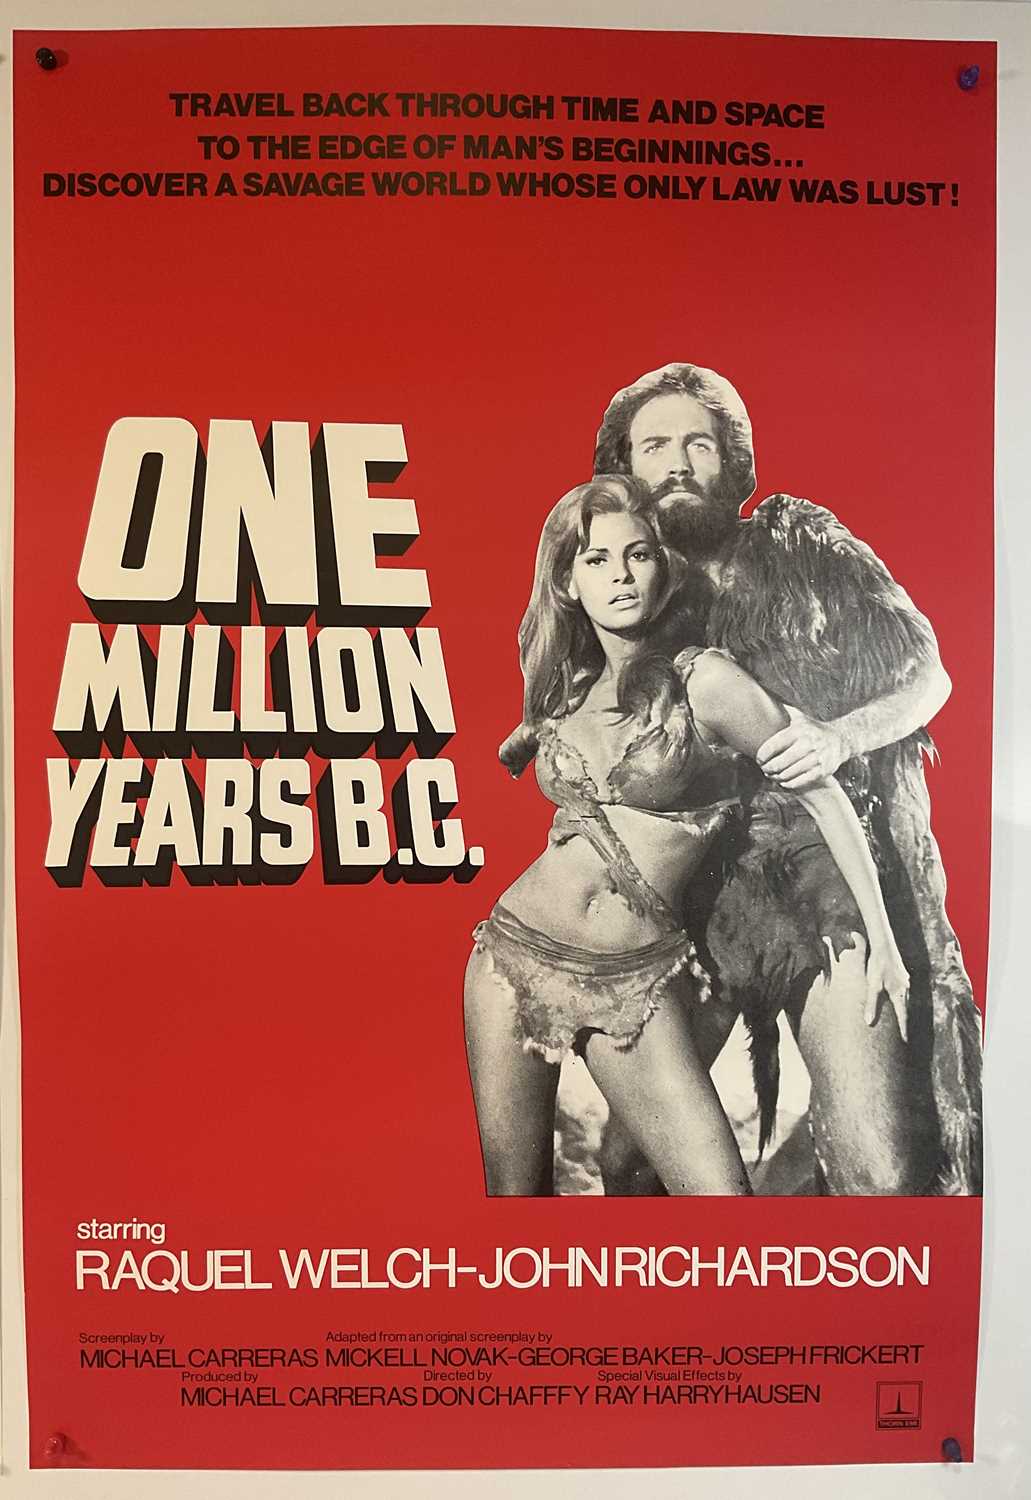 ONE MILLION YEARS B.C. (1966) British One sheet 1978 re-release, starring Raquel Welch and THE - Image 2 of 3